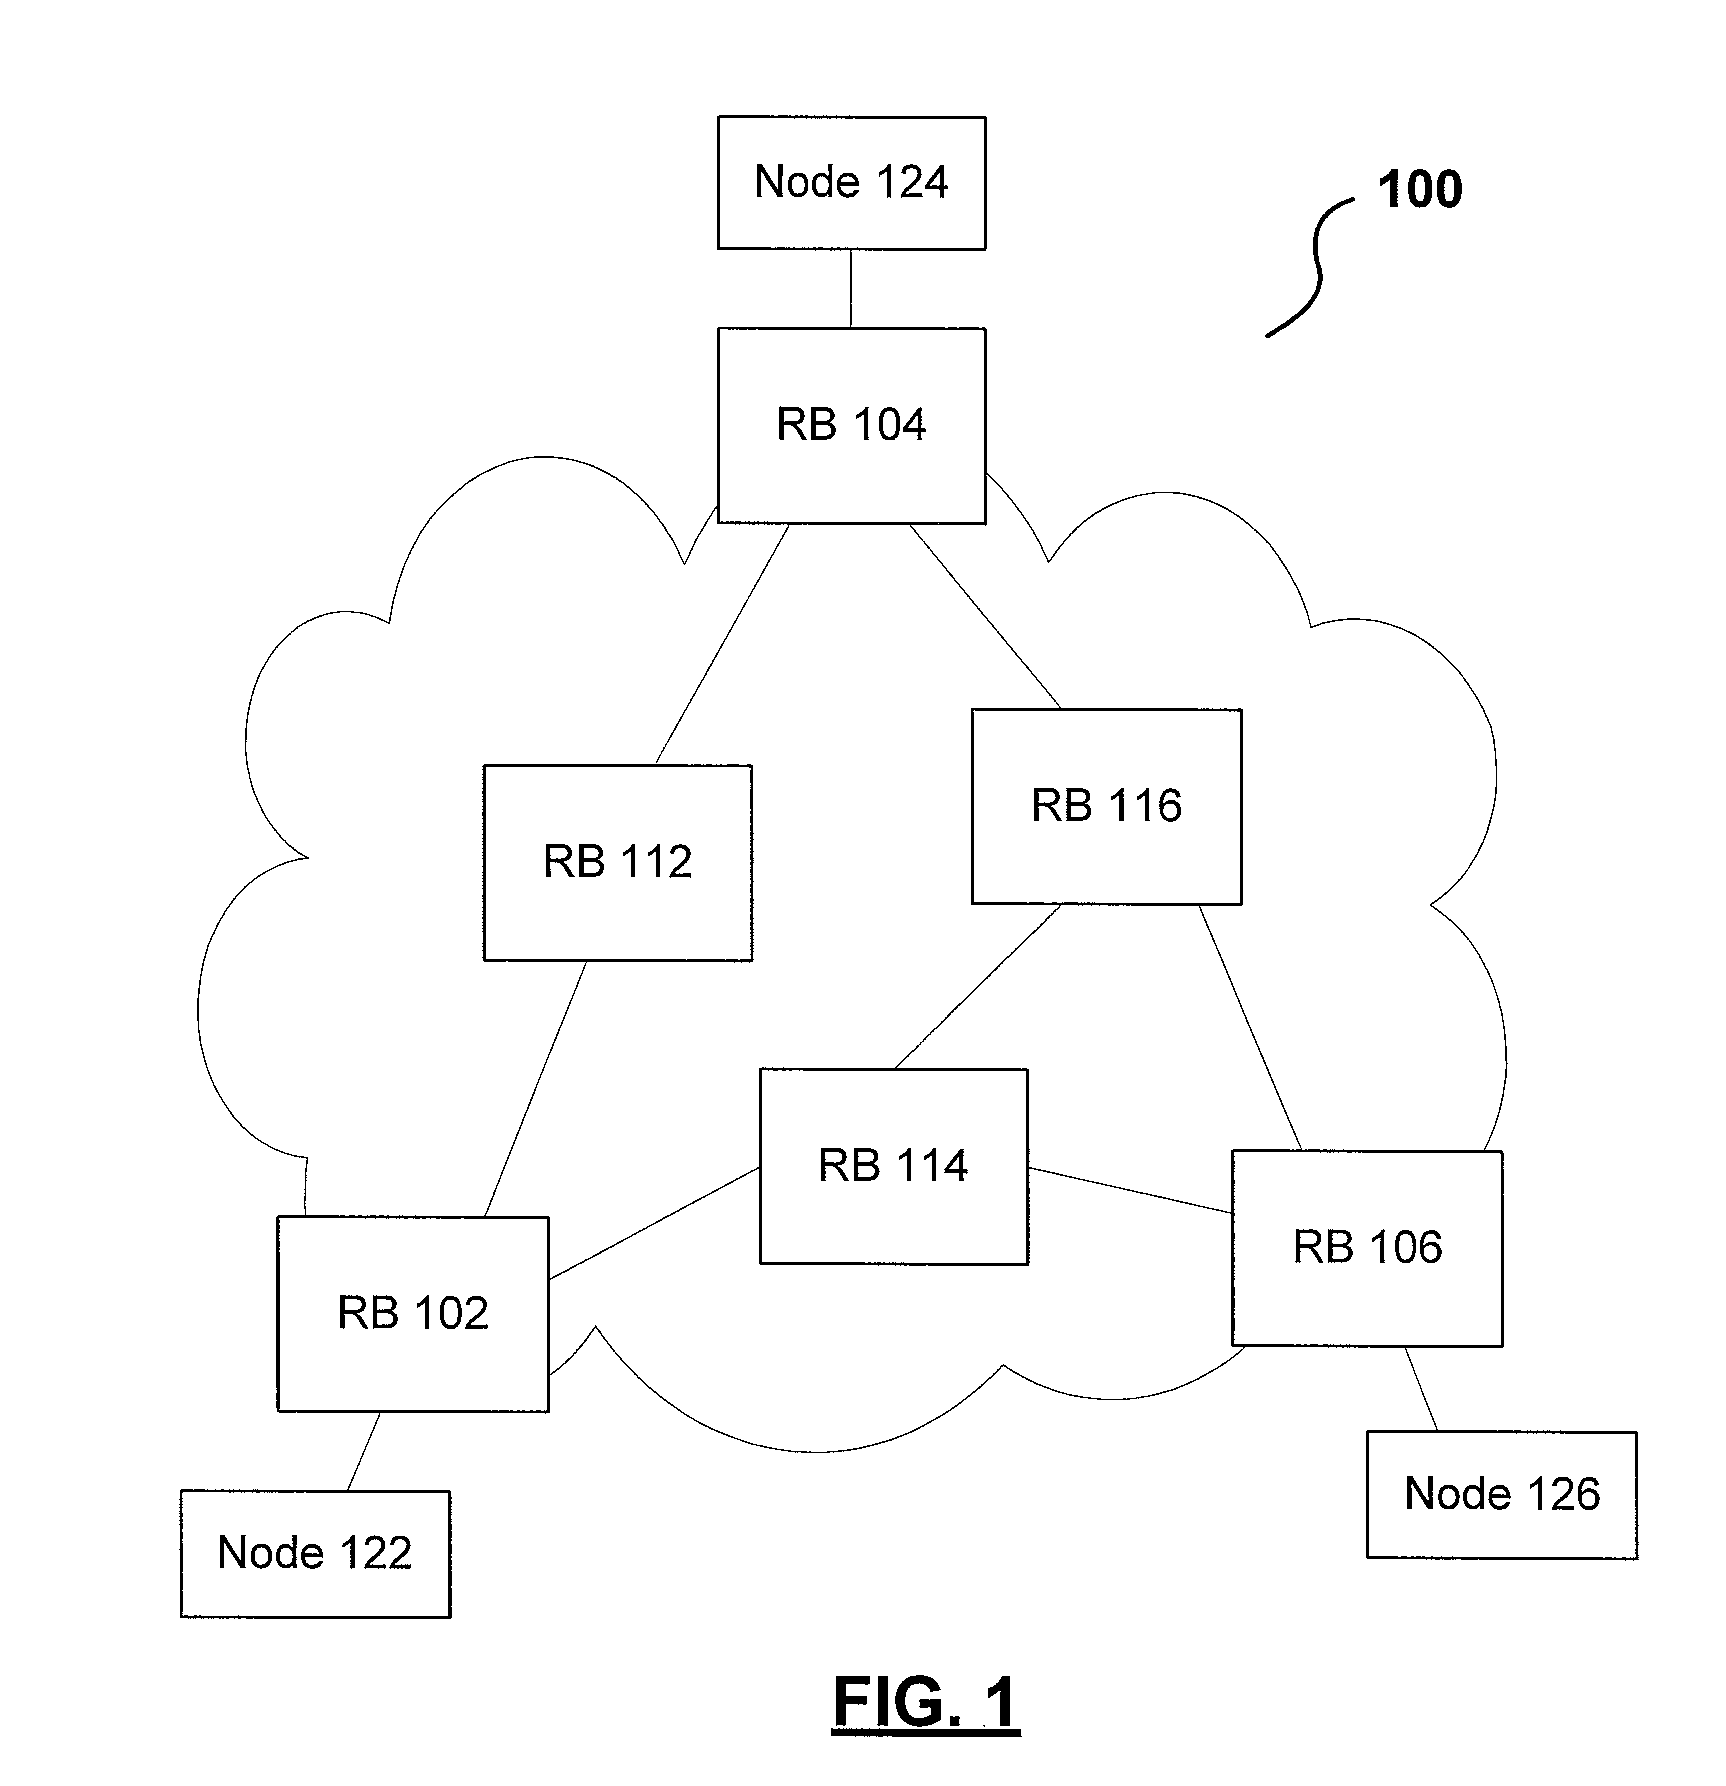 Systems and methods for providing anycast mac addressing in an information handling system